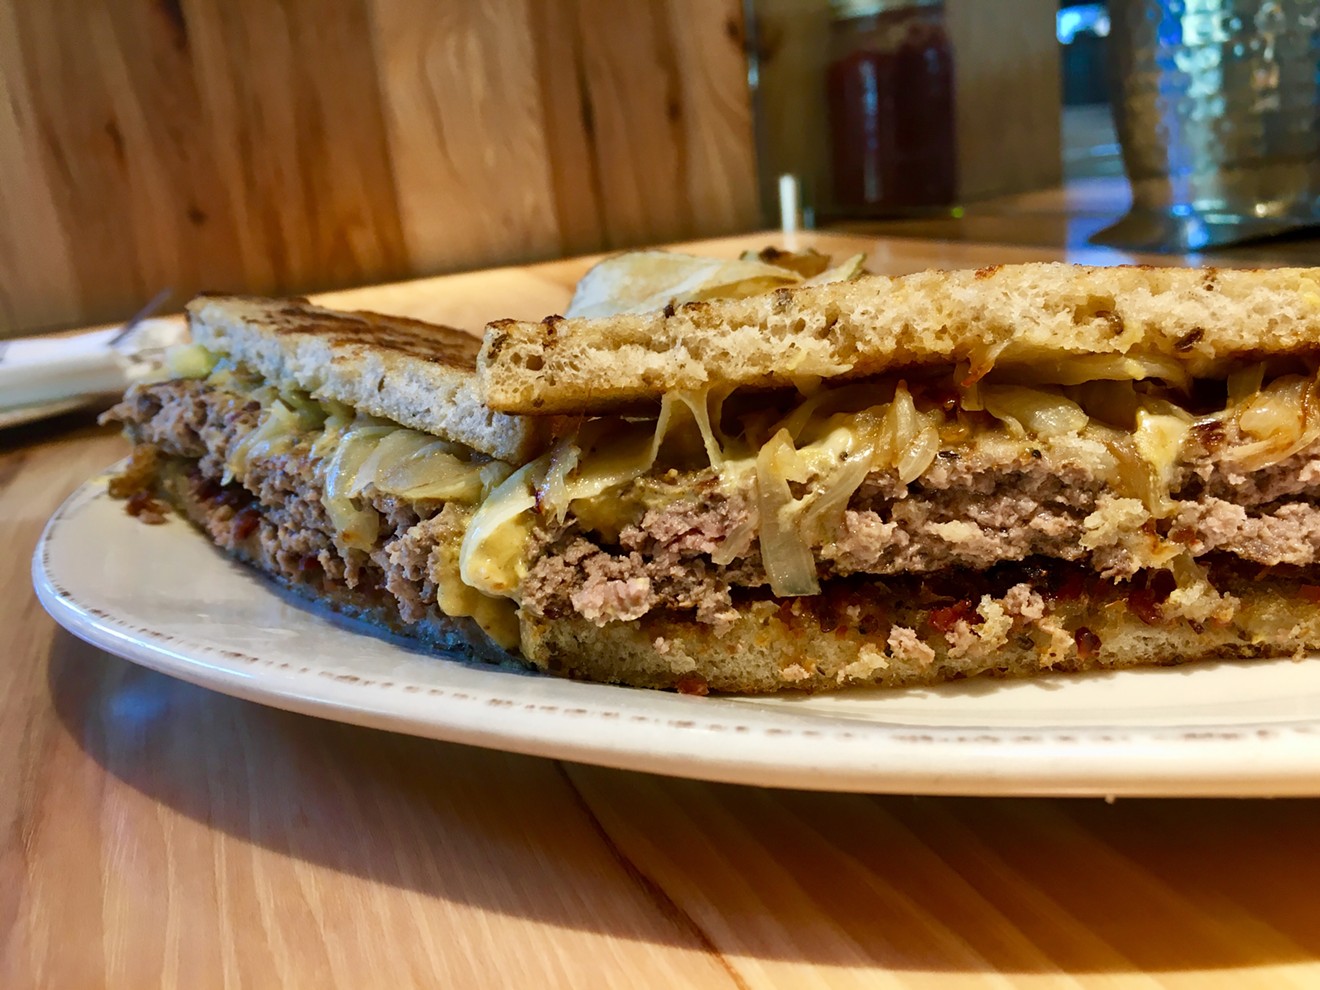 The patty melt is served morning, noon and night at Overeasy. It comes with housemade chips and a pickle for $14.